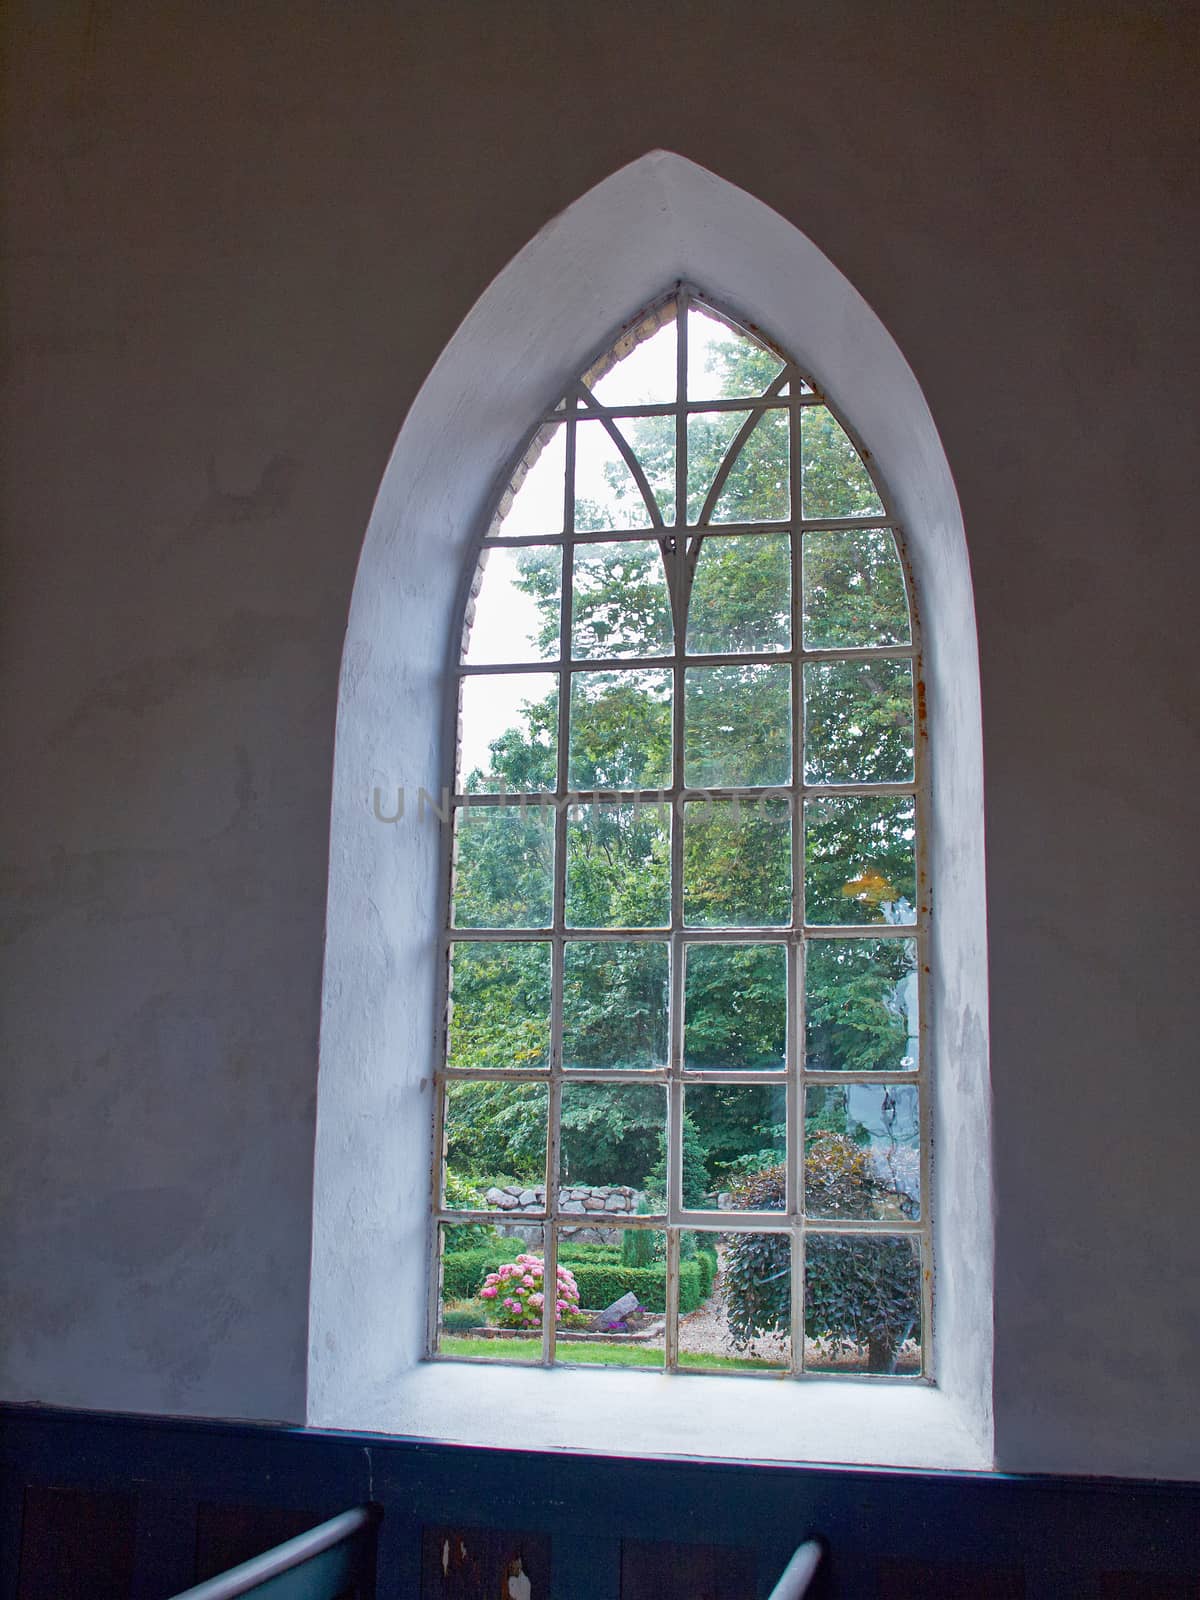 View through a window of a church by Ronyzmbow